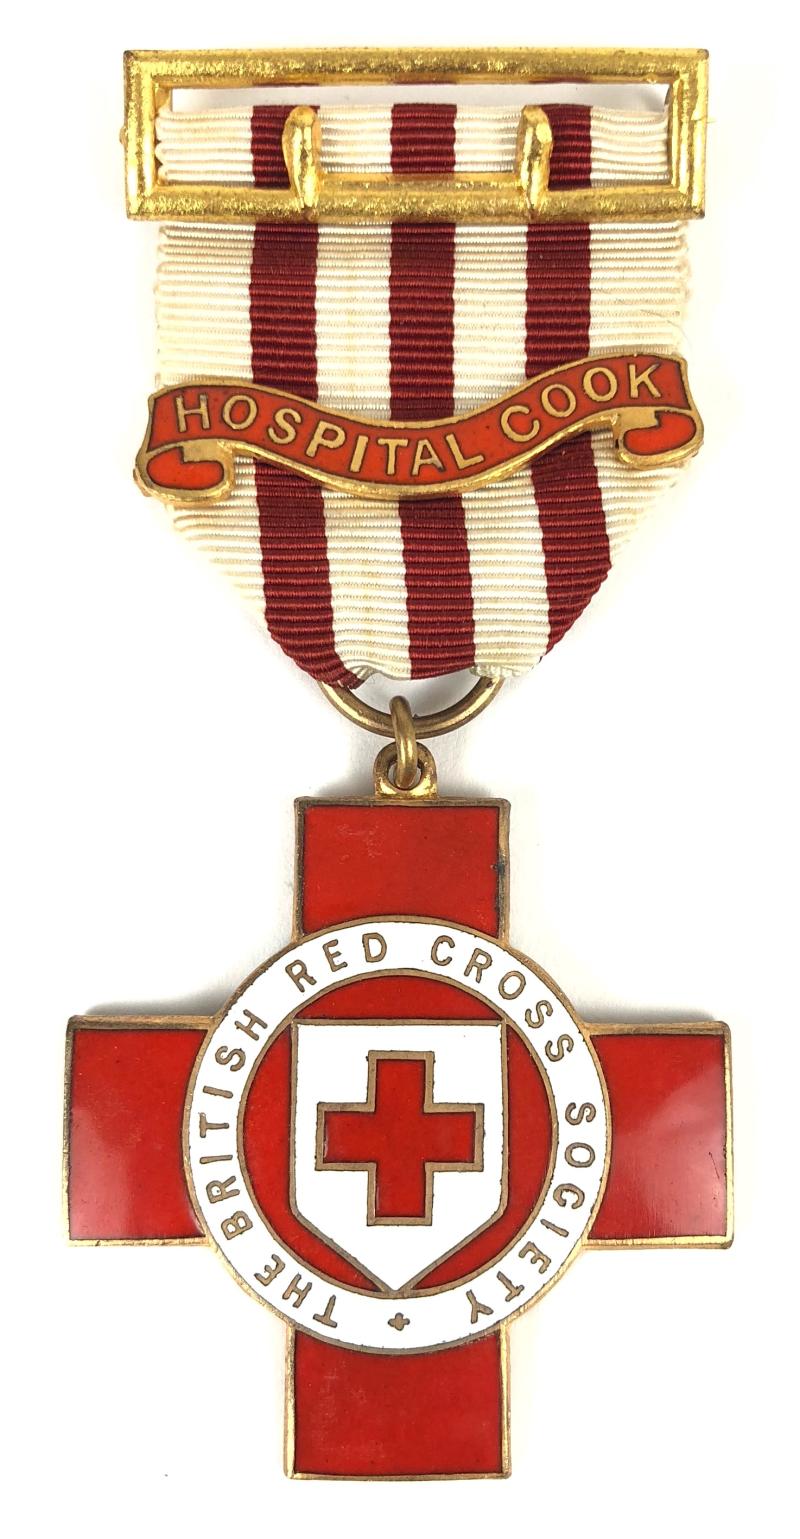 British Red Cross Society Hospital Cook Technical Medal